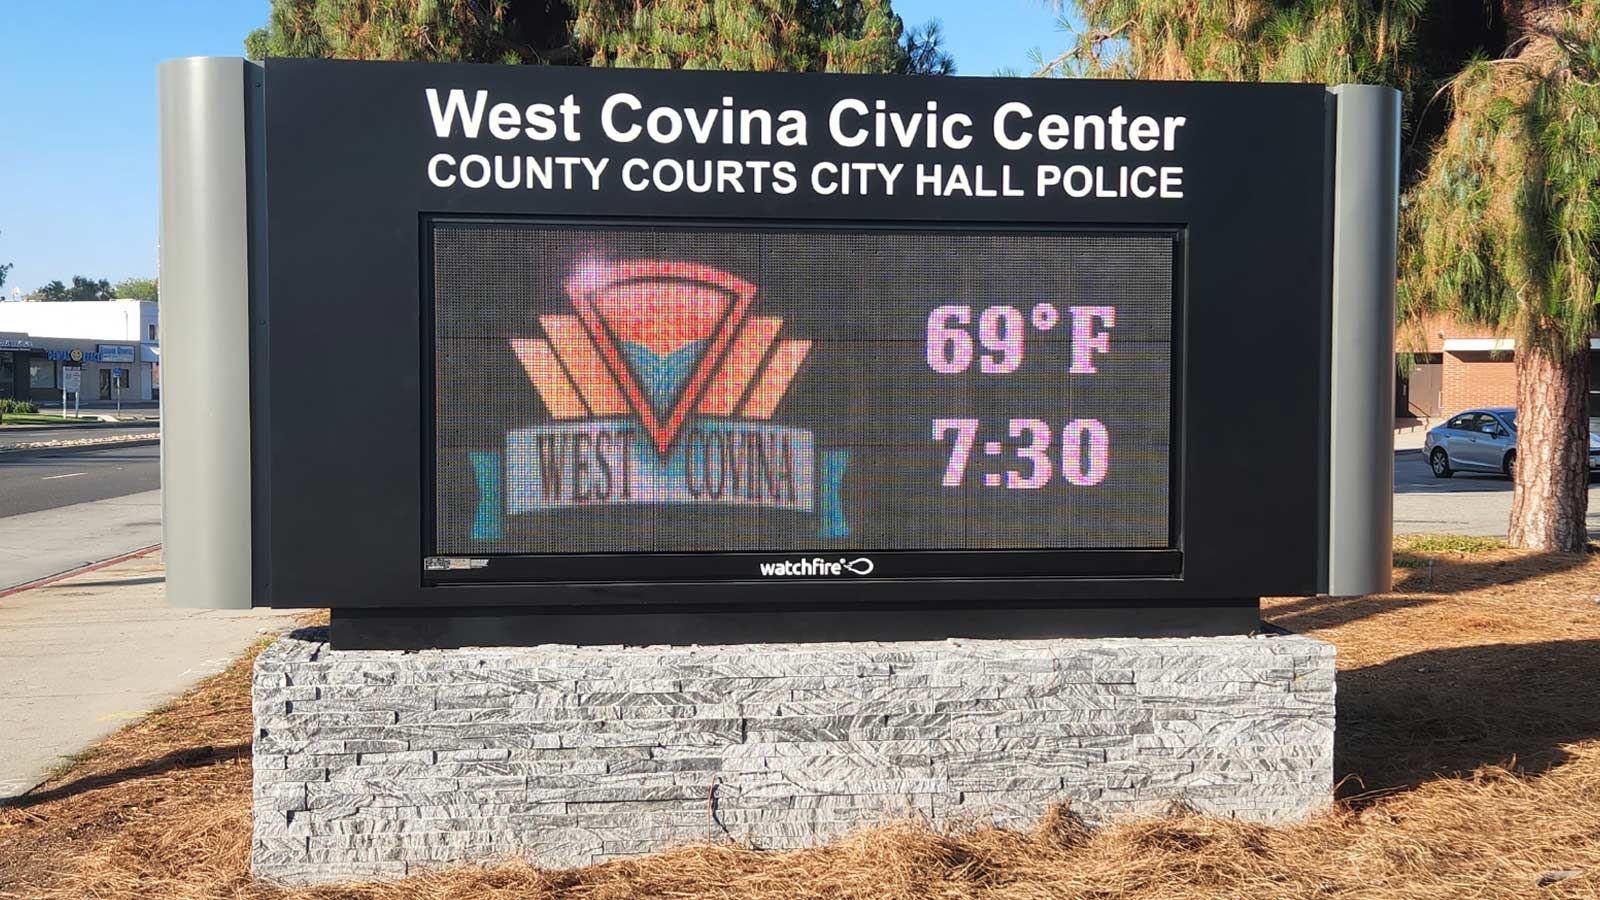 The City of West Covina light up sign placed near the road